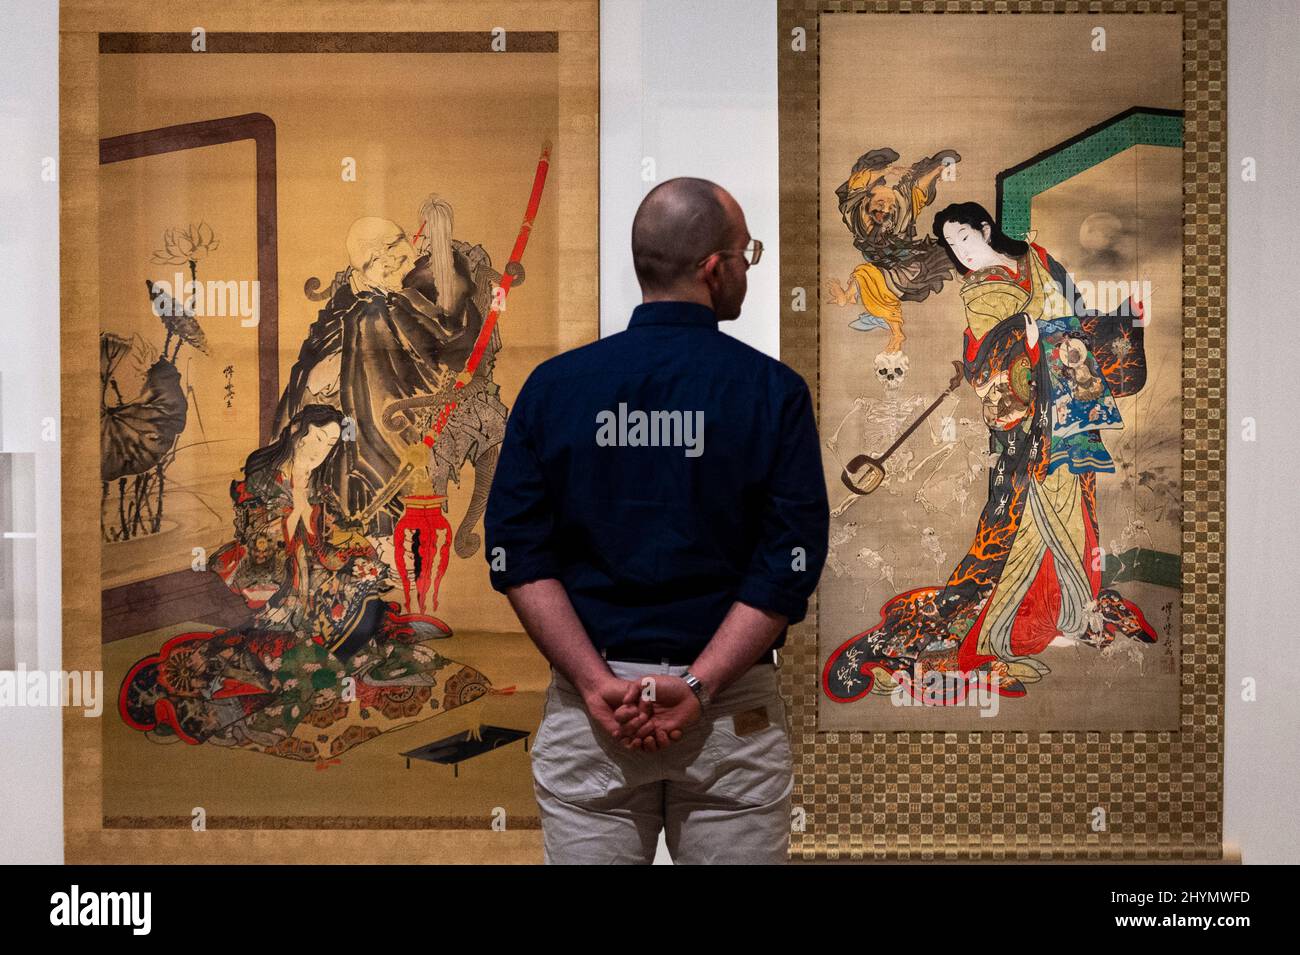 London, UK.  15 March 2022. A staff member views (L) "Hell Courtesan and Ikkyu" and "Hell Courtesan, Dancing Ikkyu and Skeletons", both 1871/89, by Kawanabe Kyōsai. Preview of Kyōsai: The Israel Goldman Collection exhibition at the Royal Academy of Arts where 80 works by late 19th century Japanese painter Kawanabe Kyōsai are on display 19 March to 19 June 2022 in the artist’s first solo UK exhibition in 30 years.  Credit: Stephen Chung / Alamy Live News Stock Photo